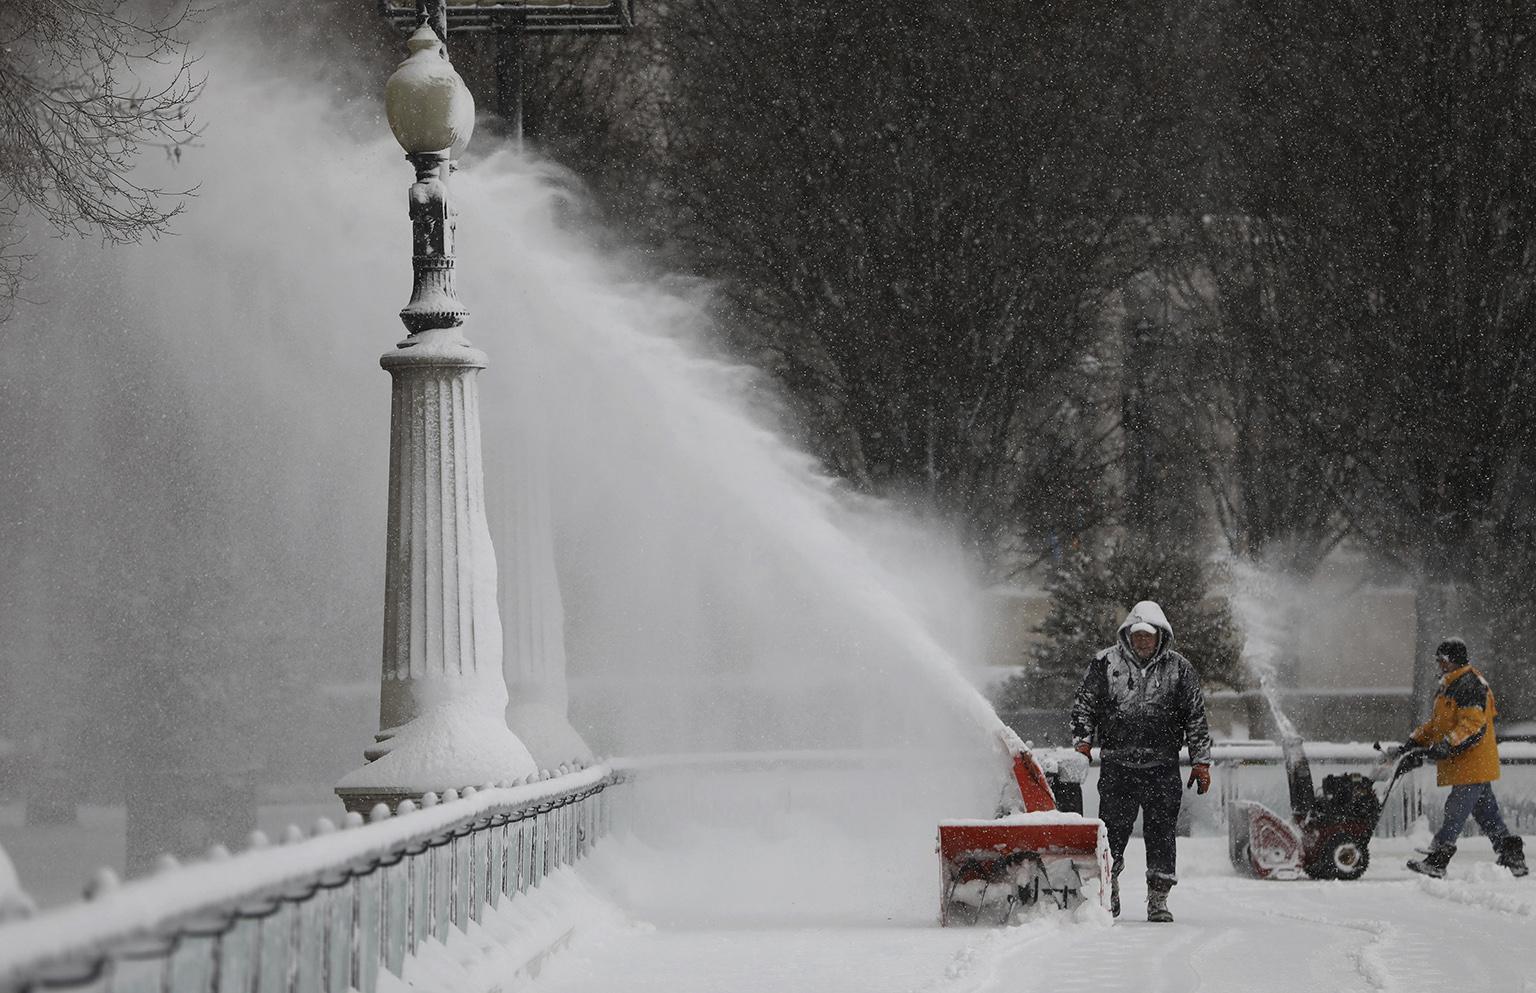 Snow-clearing efforts at Millennium Park following a snow storm on Saturday, Jan. 19, 2019. (Abel Uribe / Chicago Tribune via AP)